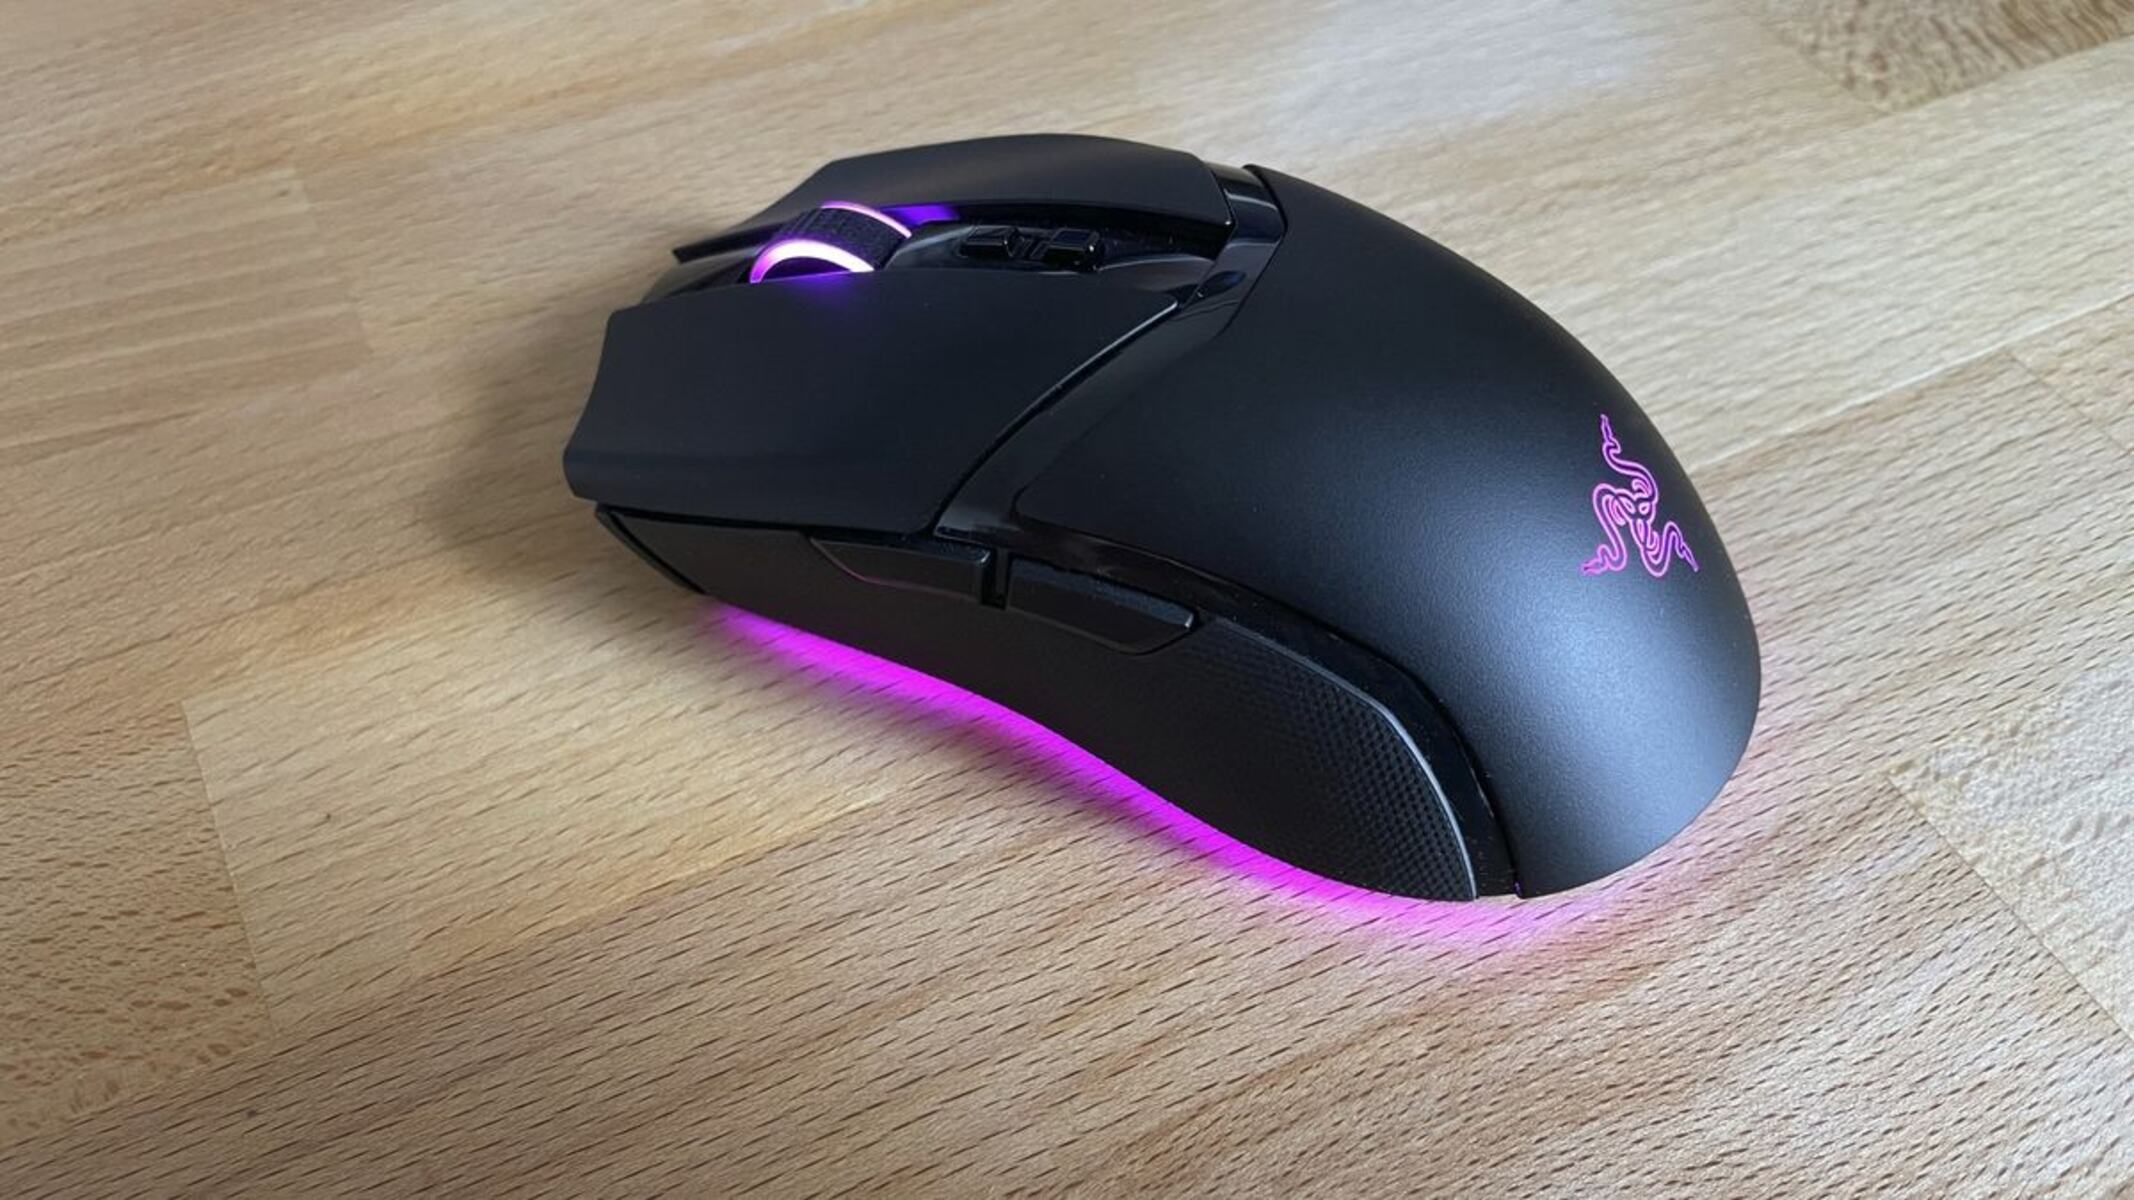 Razer Gaming Mouse: How To See DPI